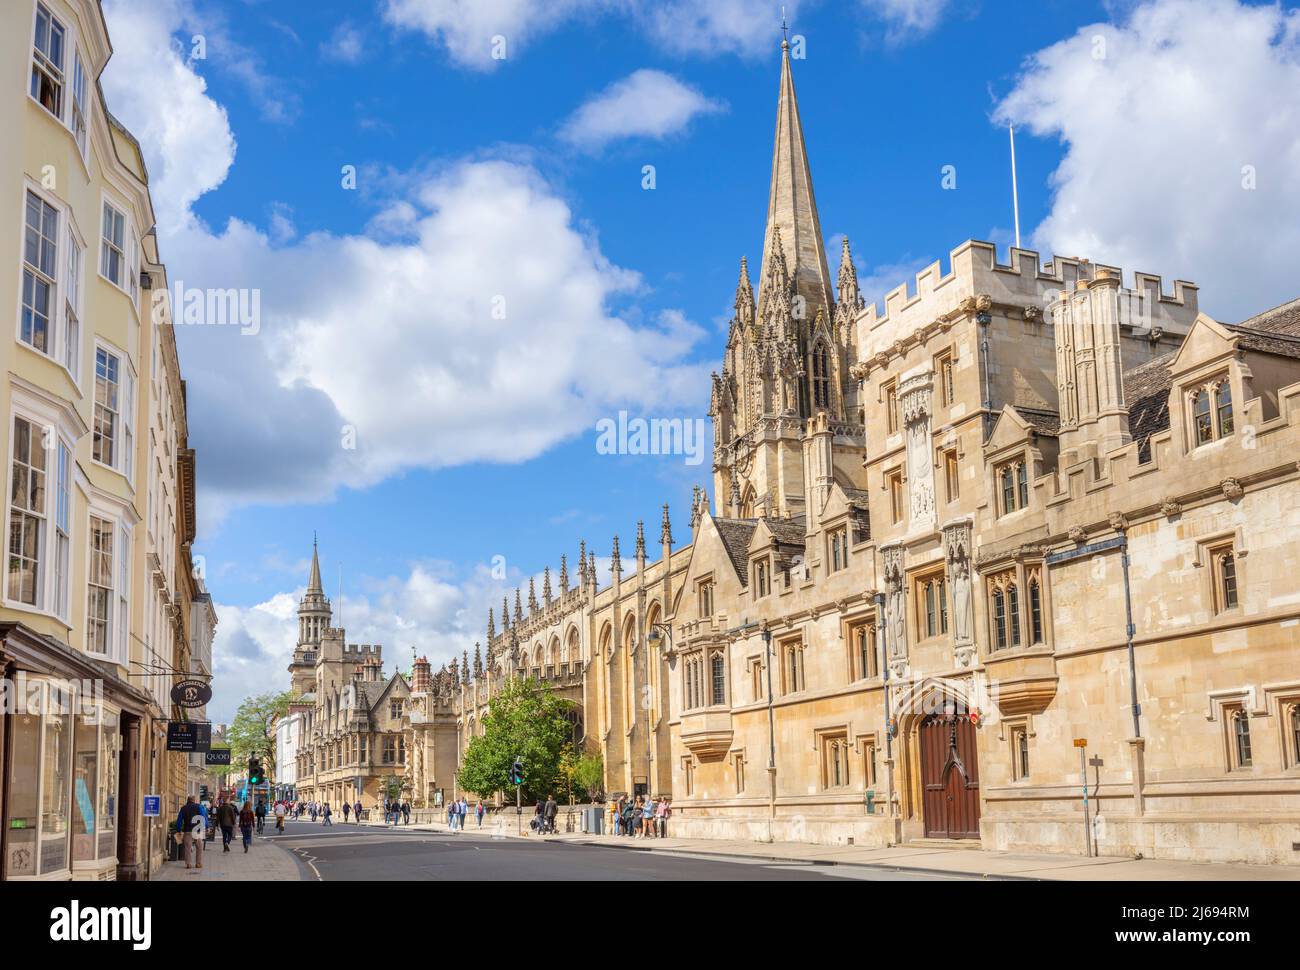 All Souls College Oxford et Tower of the University Church of St. Mary The Virgin, Oxford, Oxfordshire, Angleterre, Royaume-Uni Banque D'Images